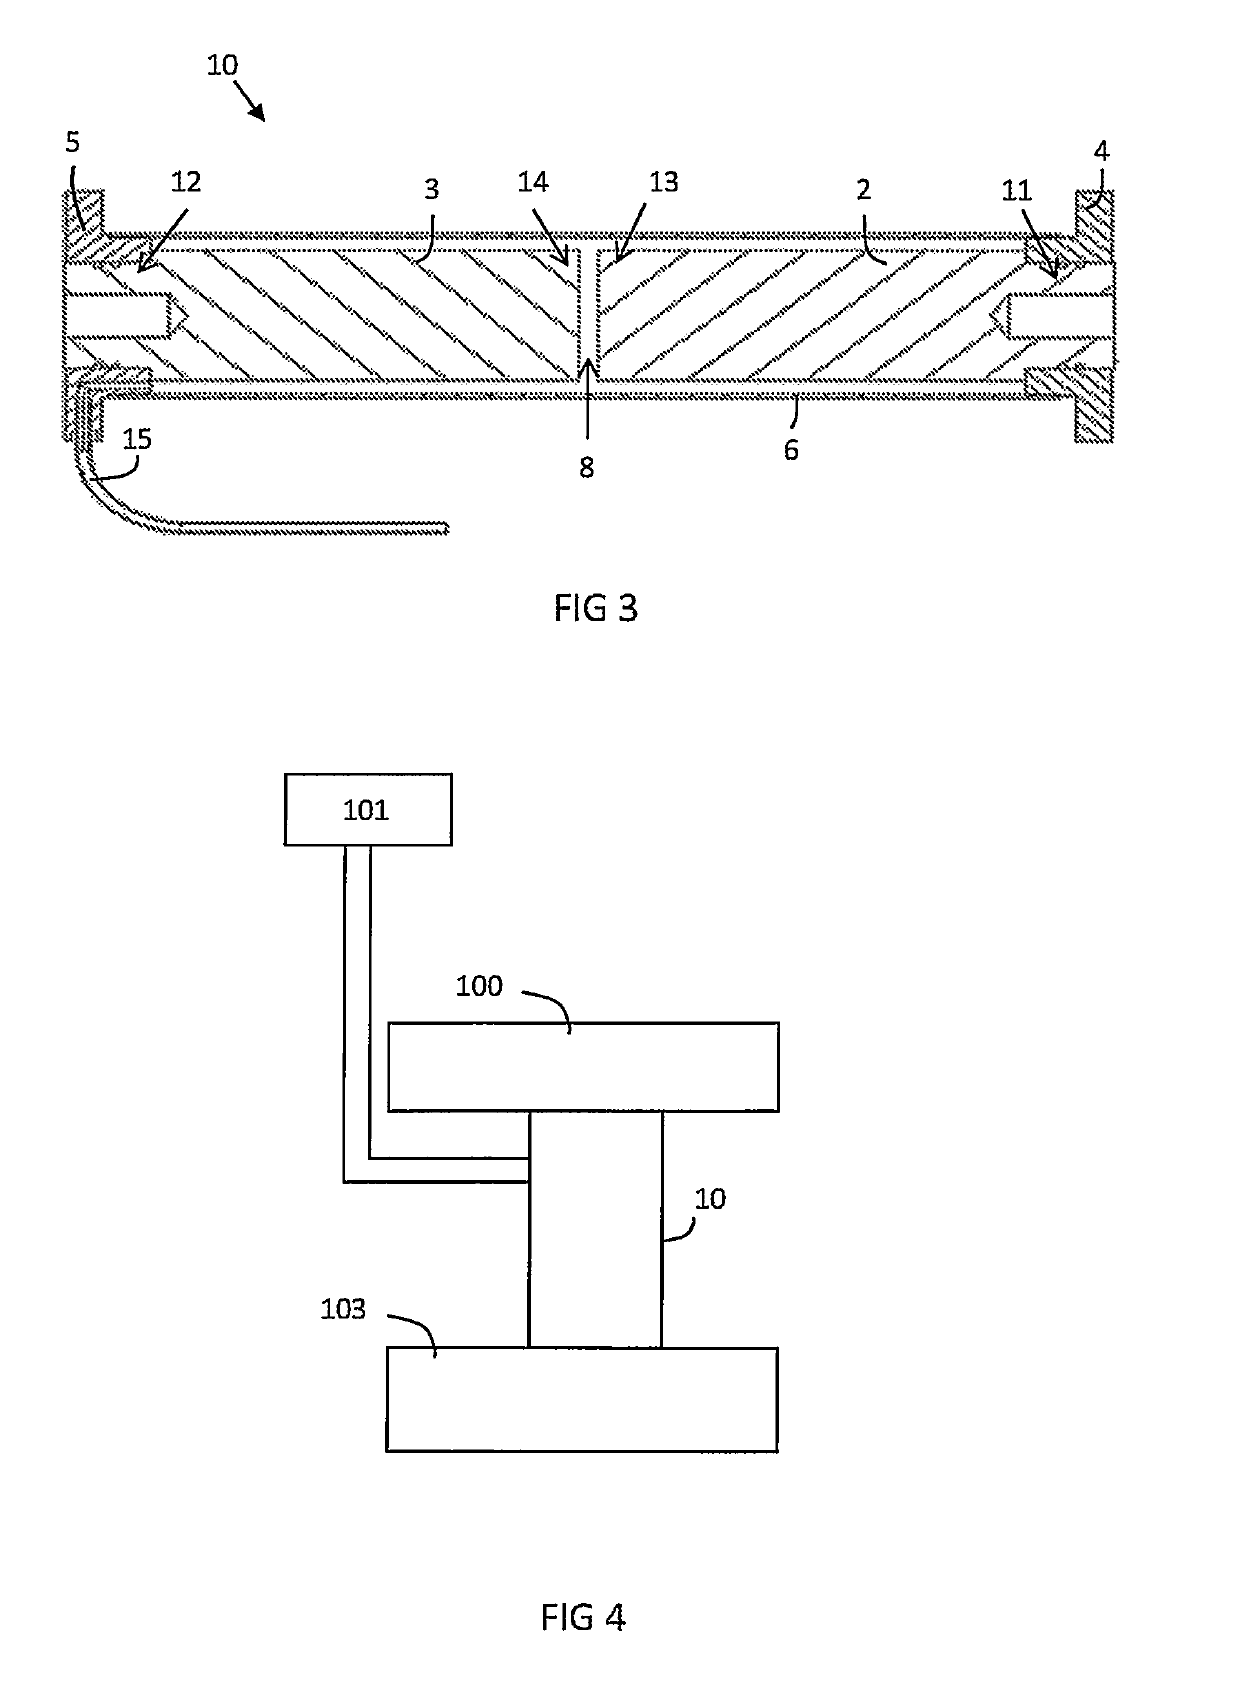 Method of Forming a Heat Switch